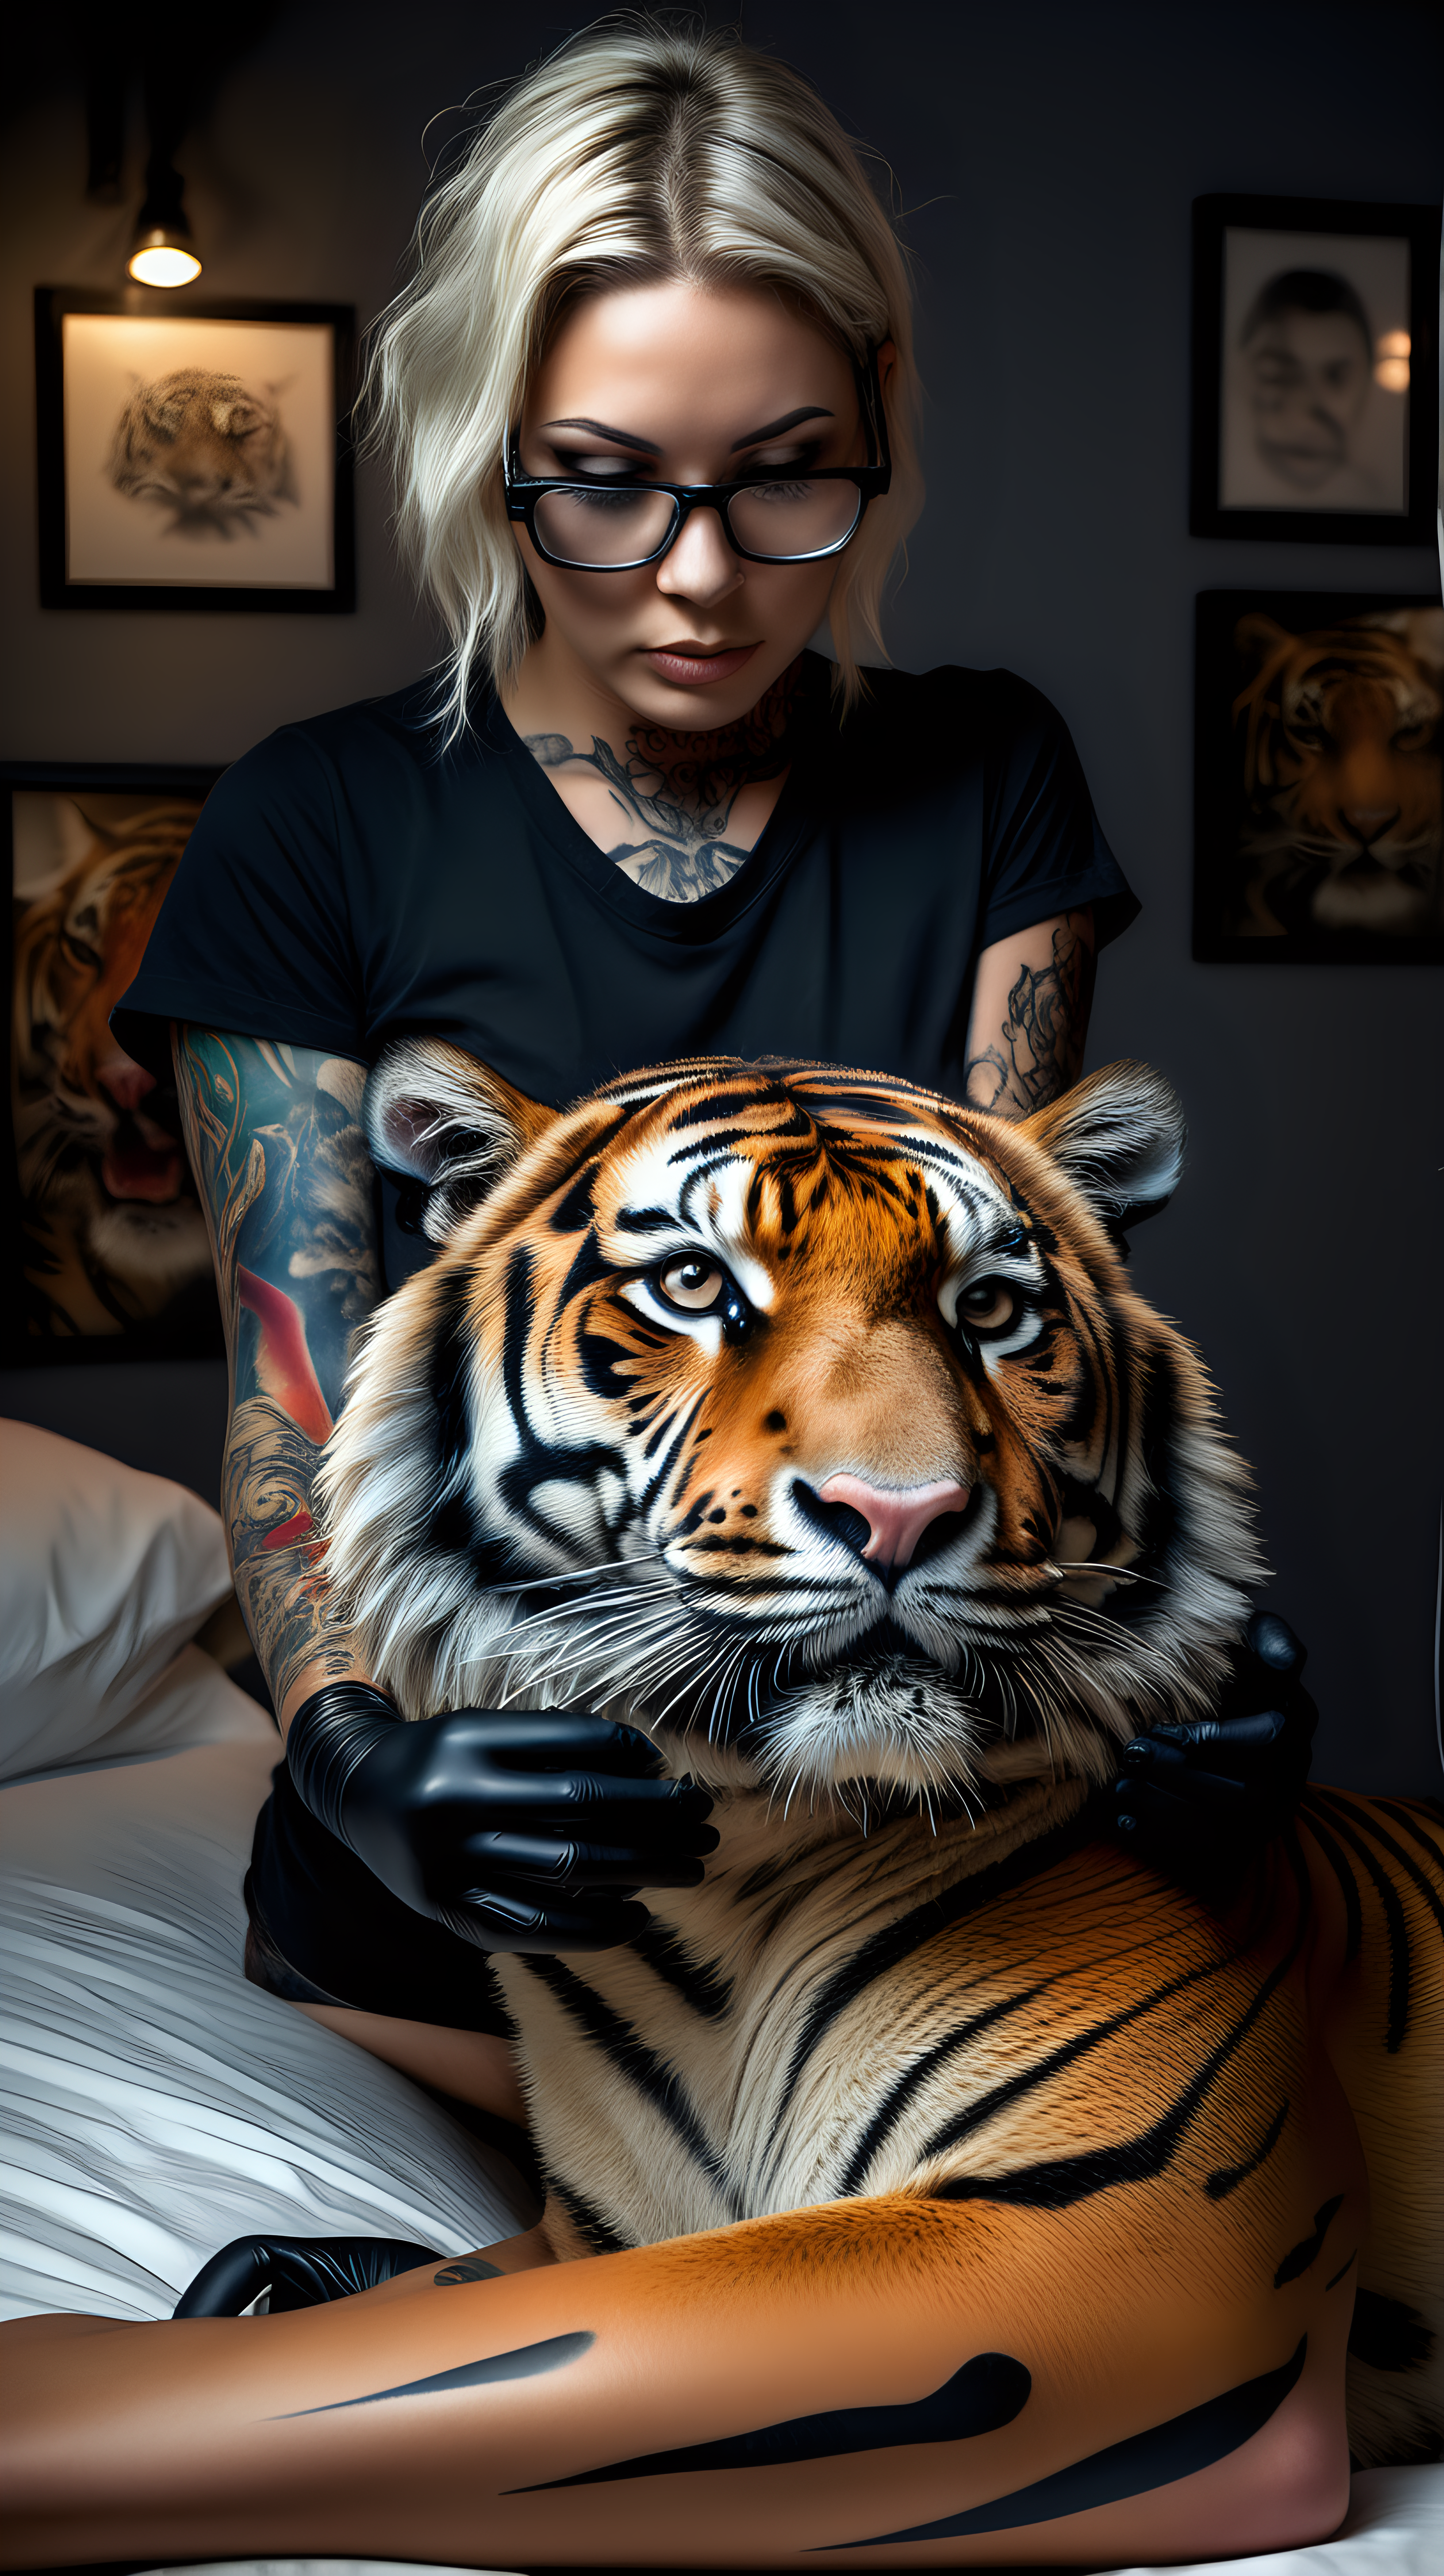 /imagine prompt :An ultra-realistic photograph capturing a sureal Tattoo performance scene. a human tattooing a tiger 
<camera> canon 5d mark III, equipped with an 85 lens at F 5.8 aperture setting
<location> a  tattoo studio beside an crowed street
<light> Soft spot light gracefully illuminates the subject’s body, casting a dreamlike glow.
/describe : a beautiful  woman that she is a tattoo artist with glasses and black shirt ,has black nitrile gloves, has a black surgical mask, seated beside the  client bed, tattooing on a real wild tiger's body! a golden tattoo machine in his hand.
–no tattoos on head 
 woman  has natural beauty with beautiful blonde short hair  .
a real tiger laid gently on tattoo client's bed same as a tattoo client to taking tattoo on its body creating a sureal scene.
The background is black , absolutely blurred, highlighting the subjects.
The image, shot in high resolution and a 16:9 aspect ratio, captures the subject’s natural beauty and personality with stunning realism
–seed<>
–ar 9:16 –v 5.2 –style raw
